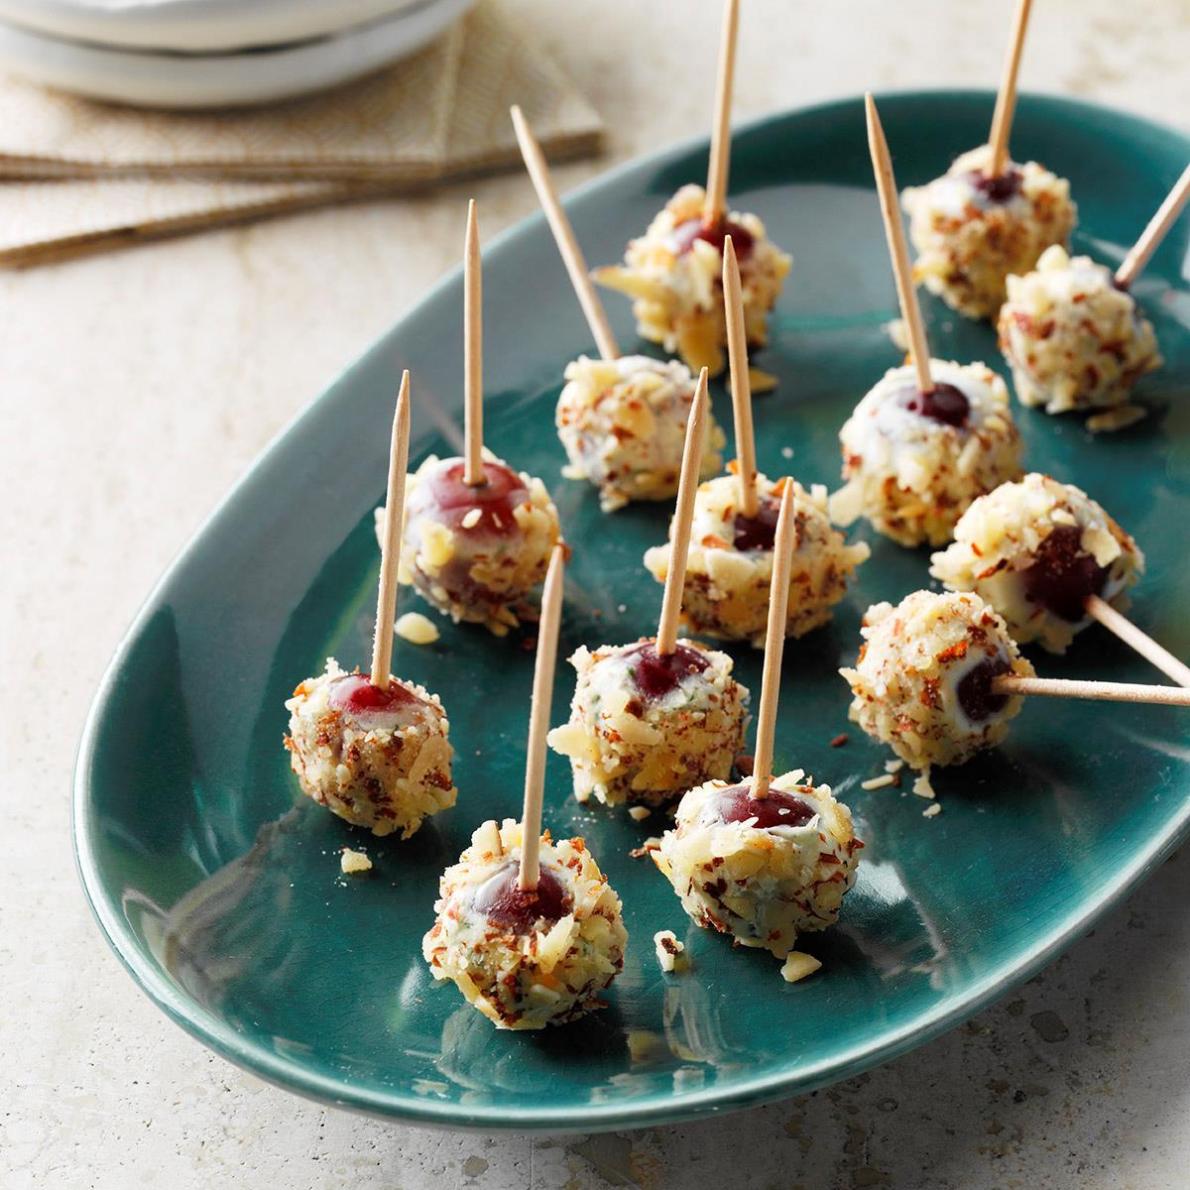 What Are Some Appetizer Ideas That Are Perfect for a Special Occasion?